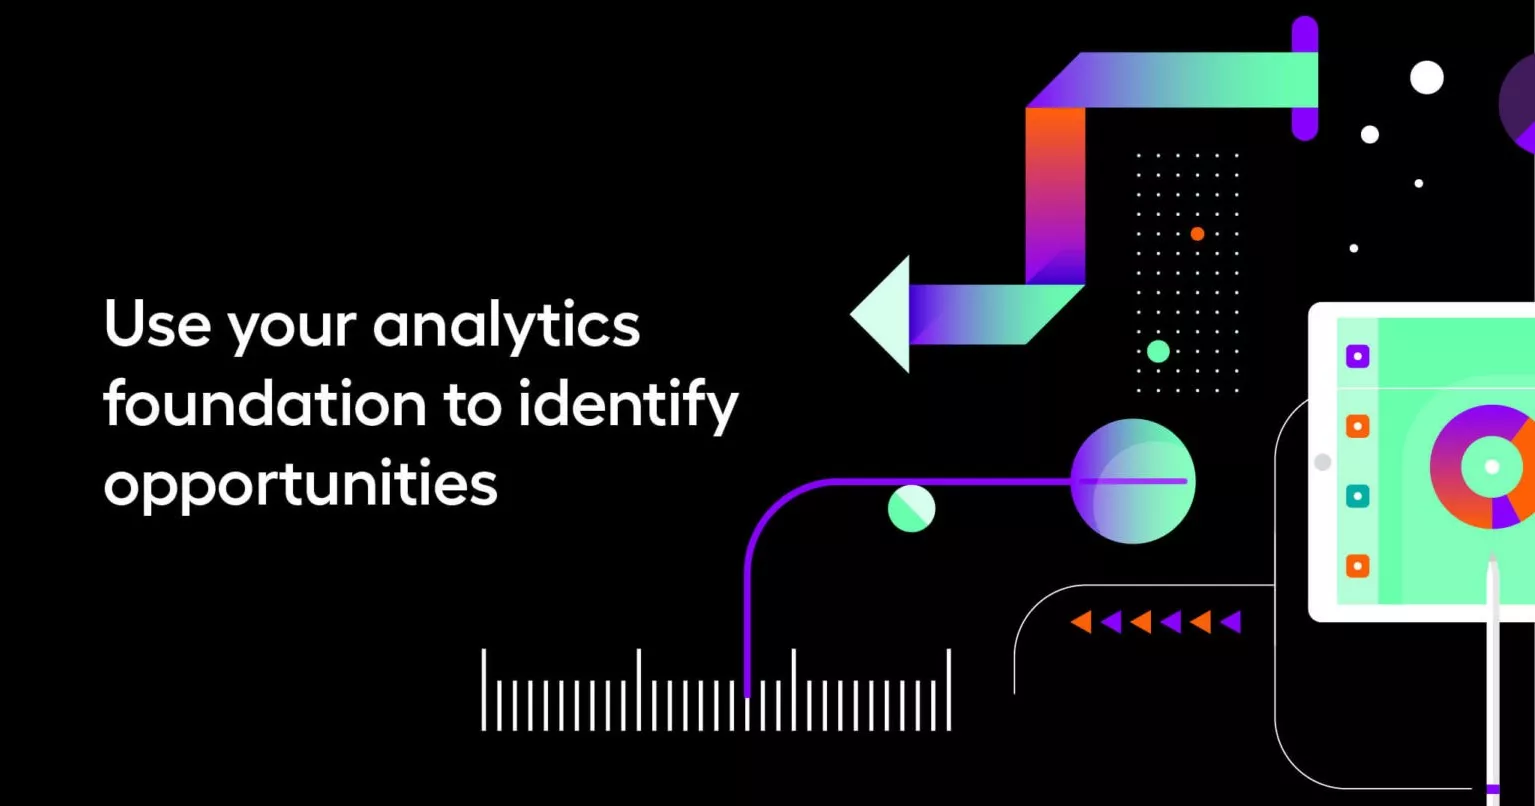 Use your analytics foundation to identify opportunities